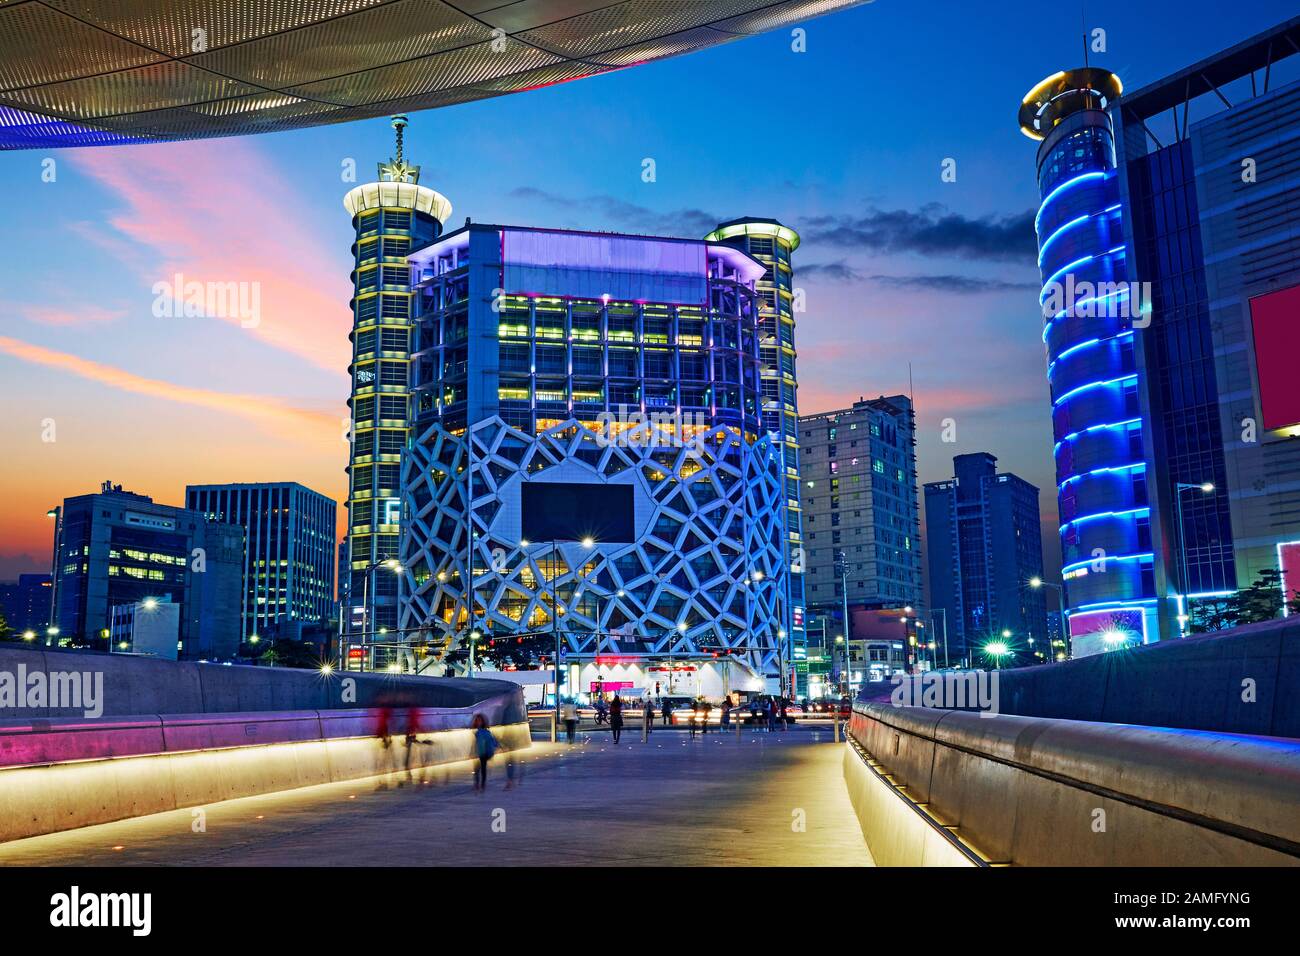 The Dongdaemun Design plaza (designed by Zaha Hadid) and retail district in Seoul illuminated at dusk Stock Photo